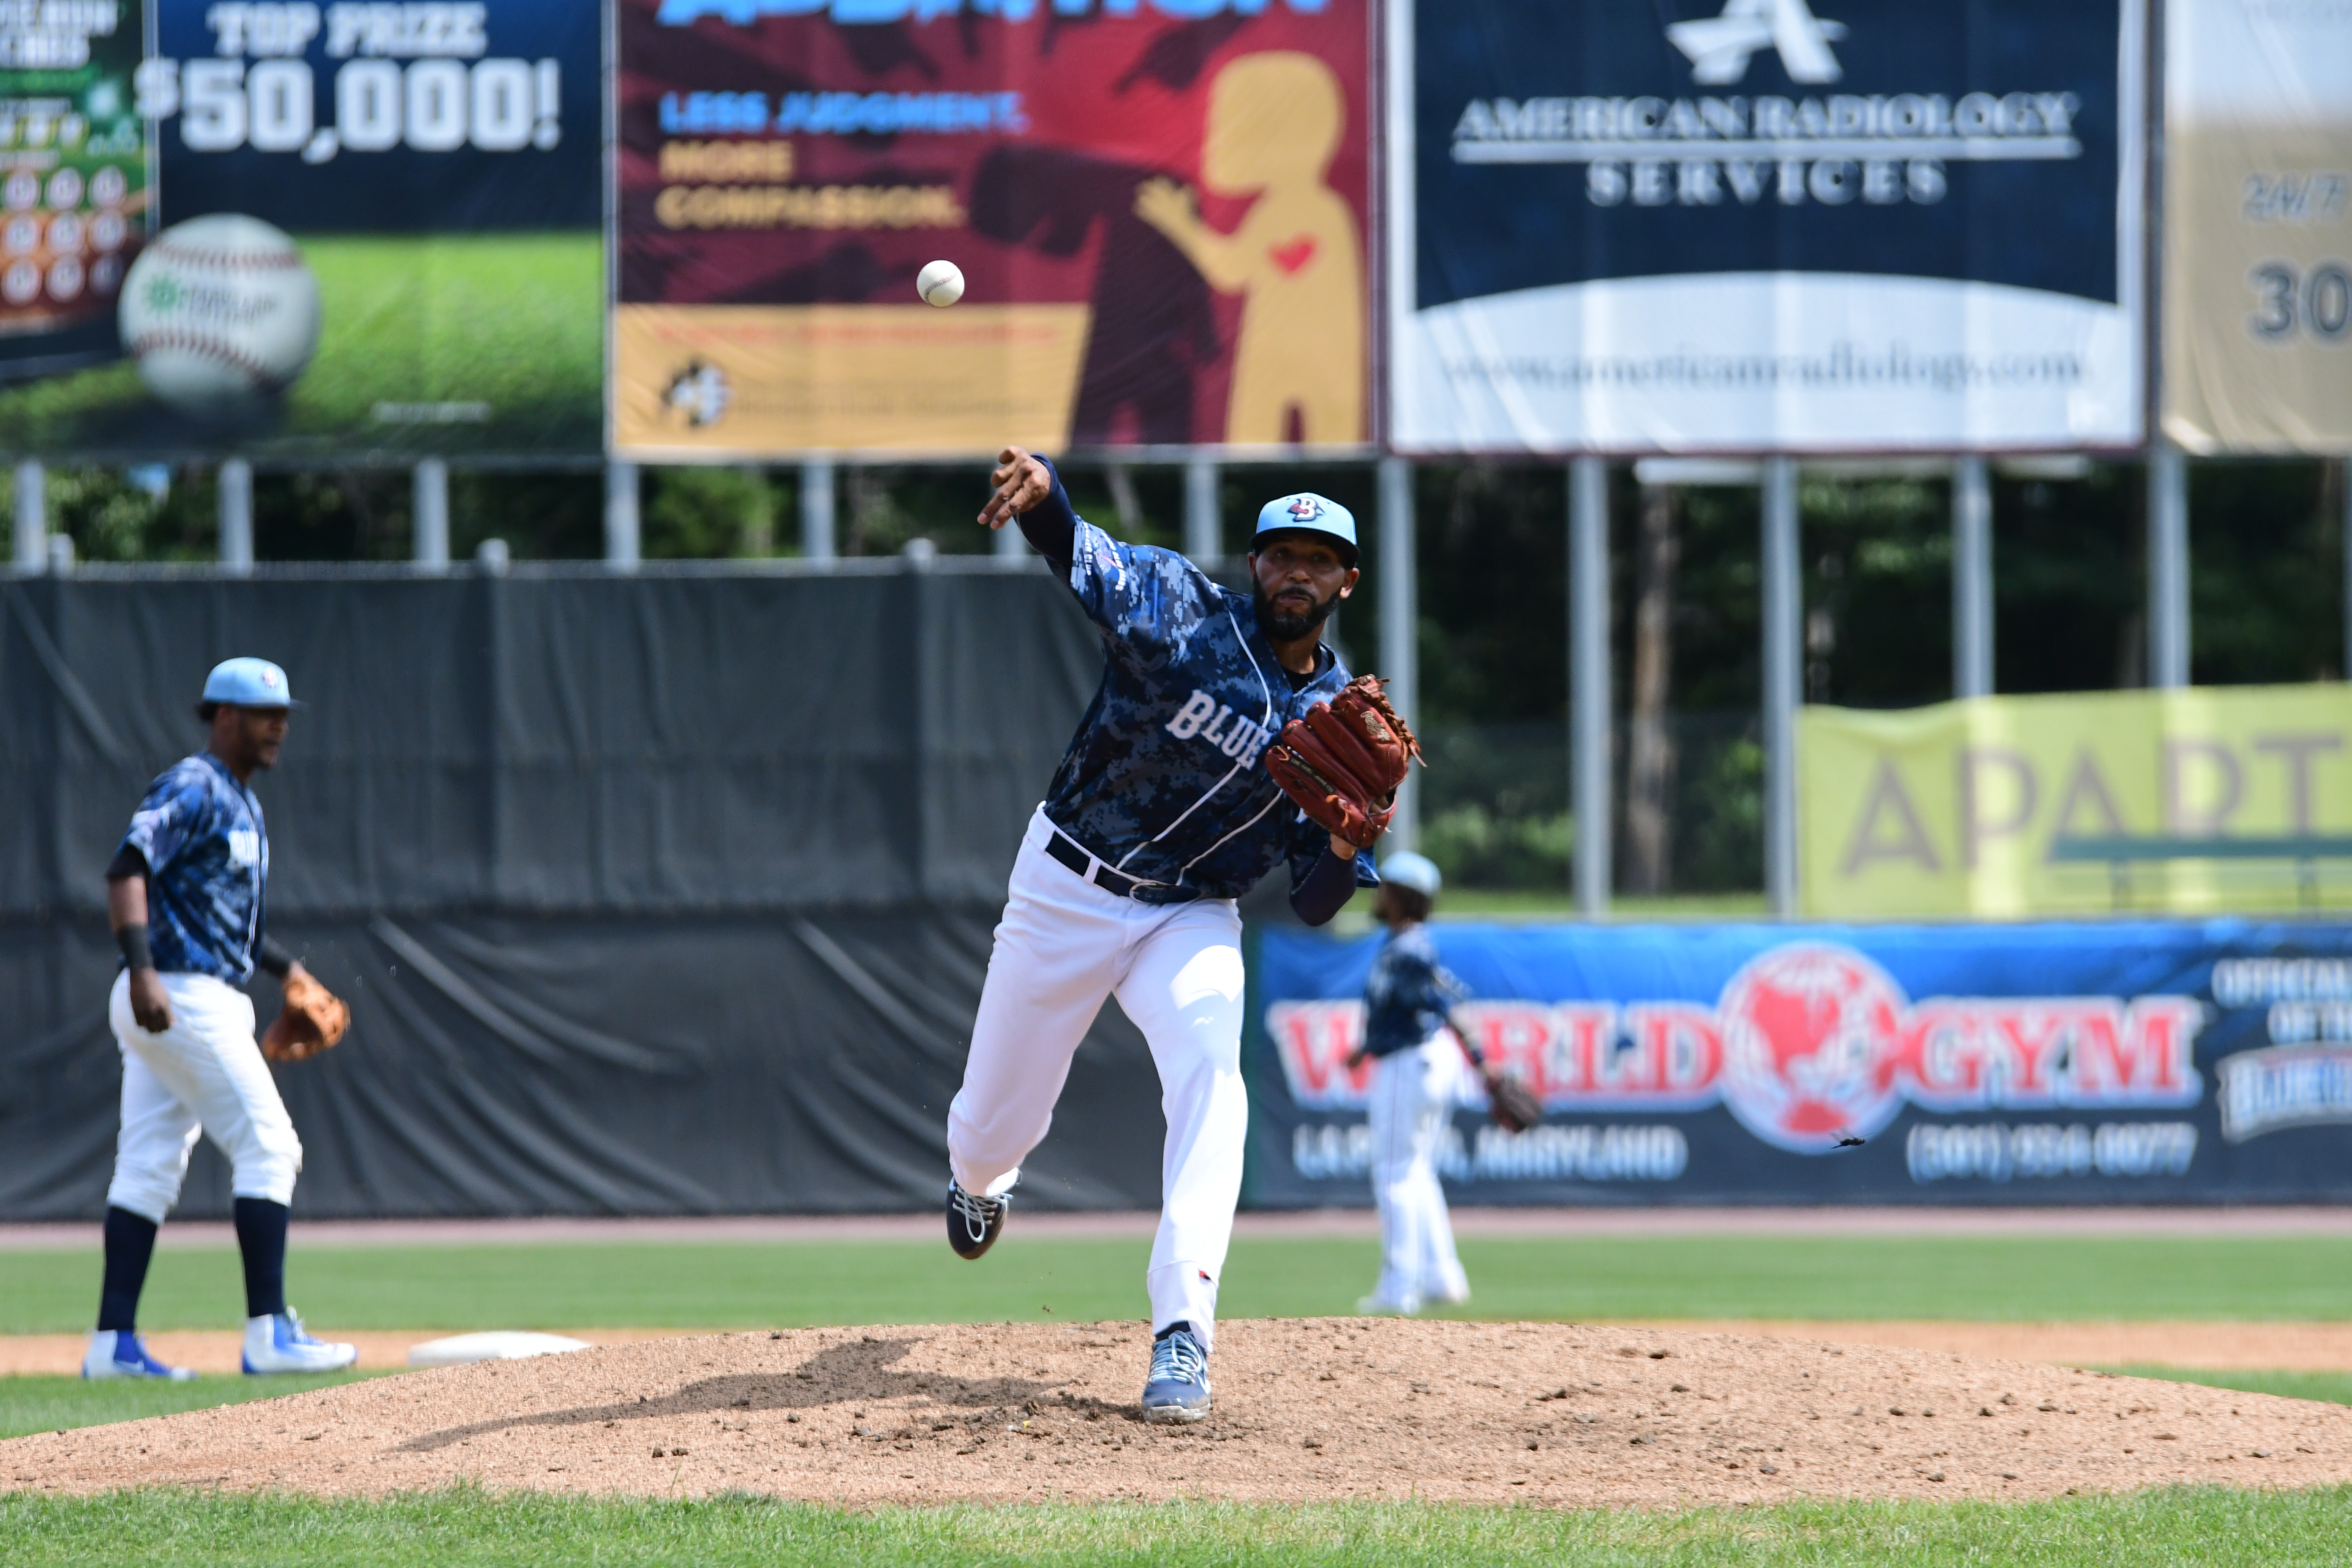 Long Ball Leads Blue Crabs to Sweep of Road Warriors